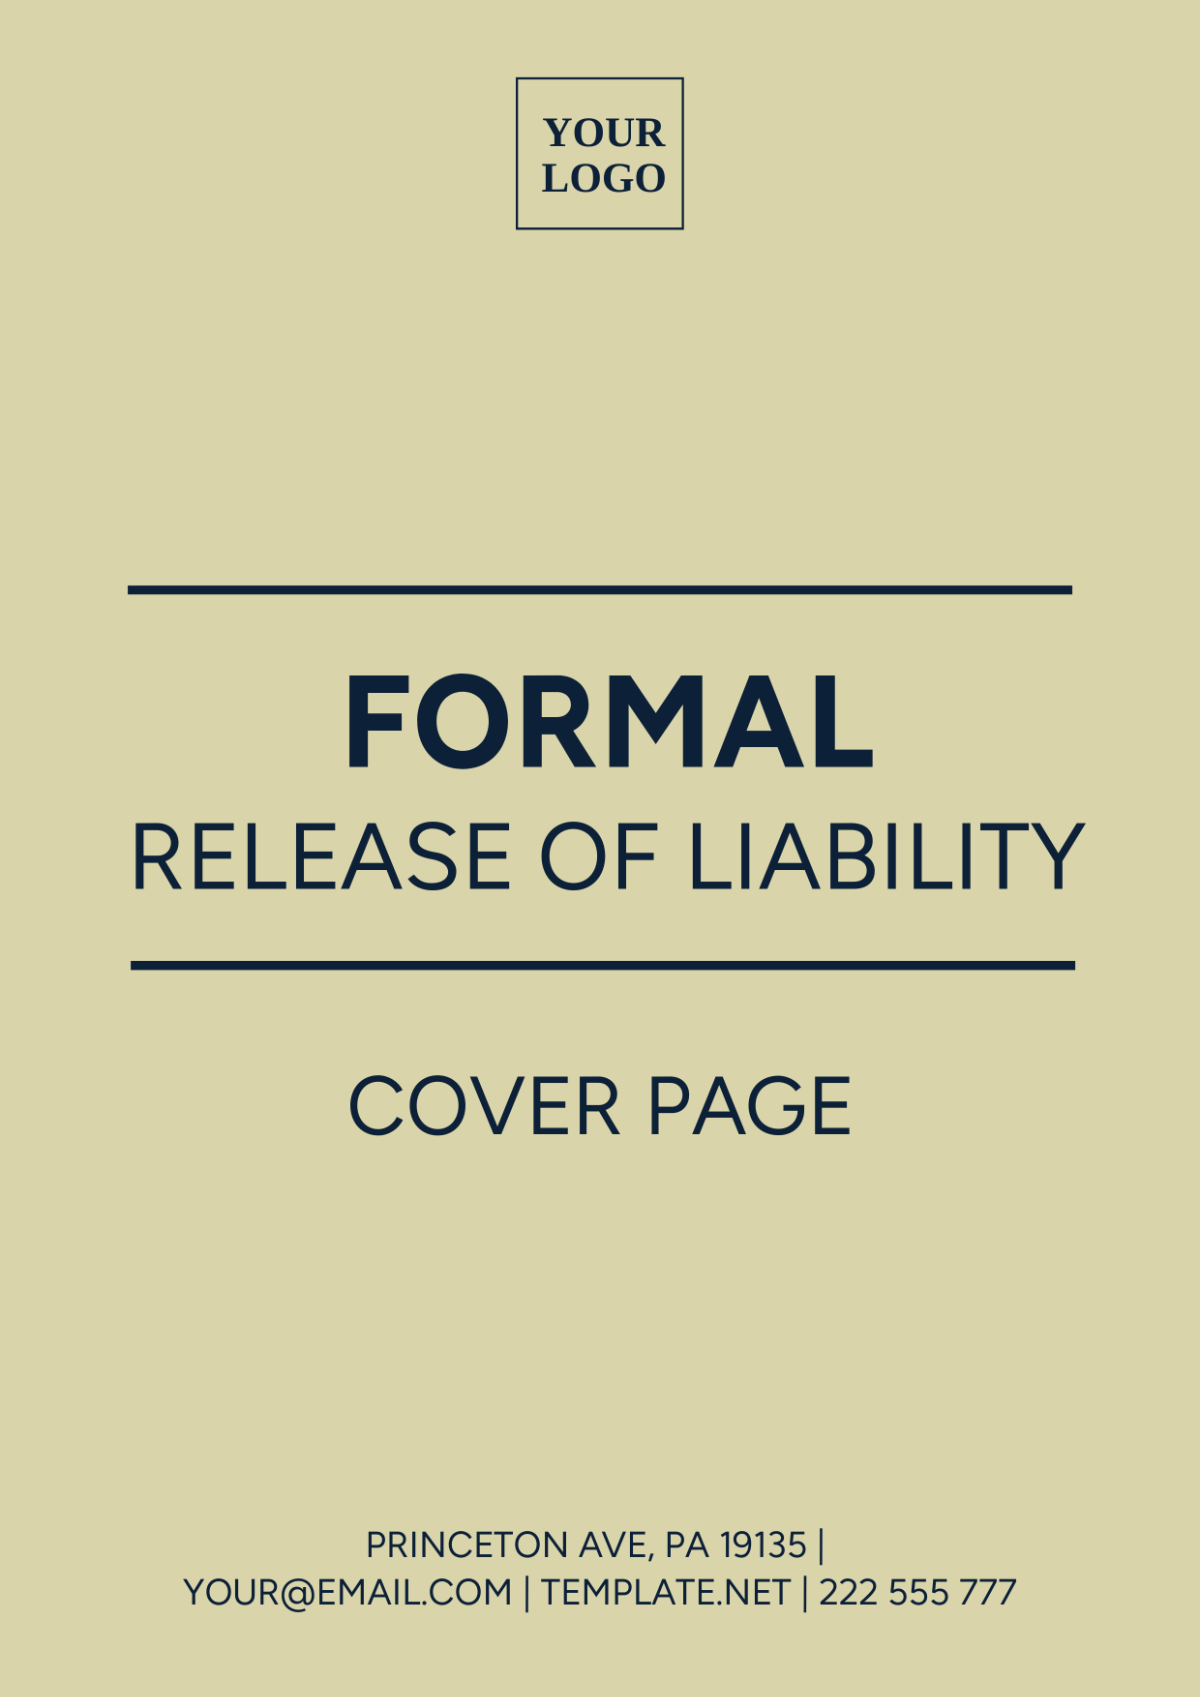 Formal Release of Liability Cover Page